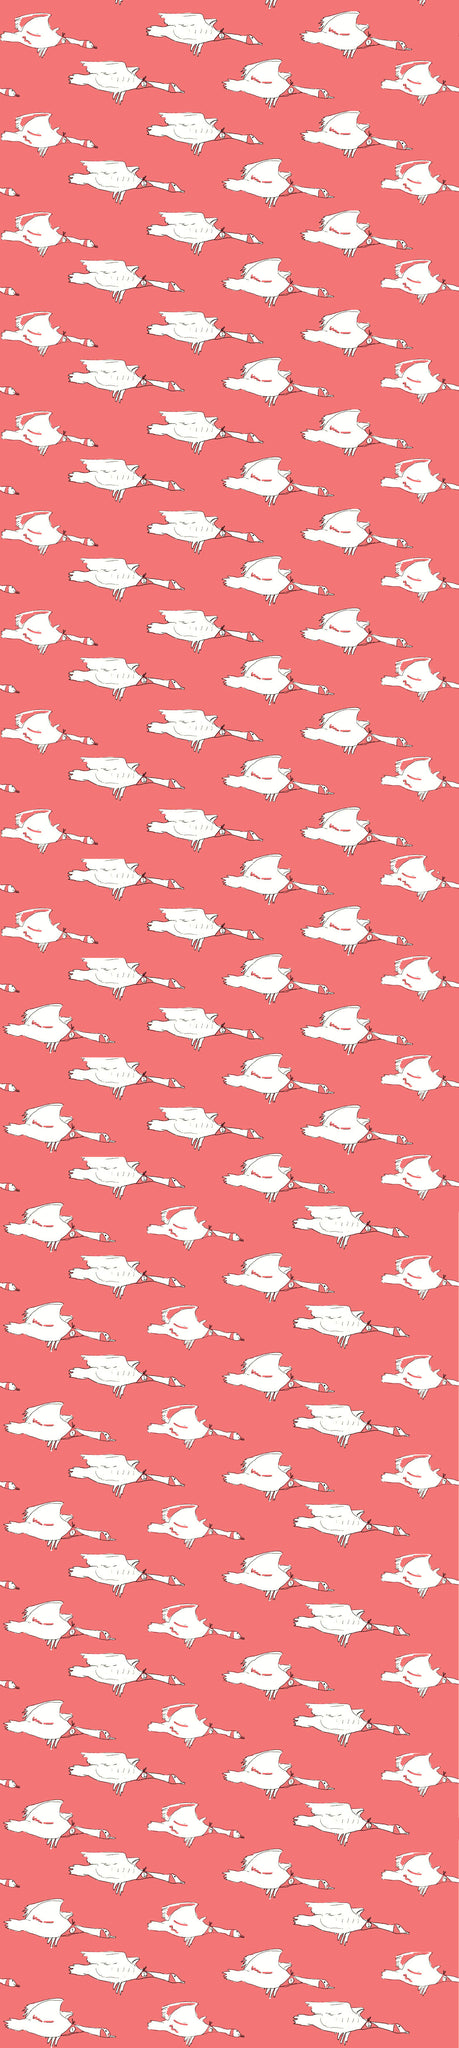 Coral Ducks Jersey Fabric - Cotton